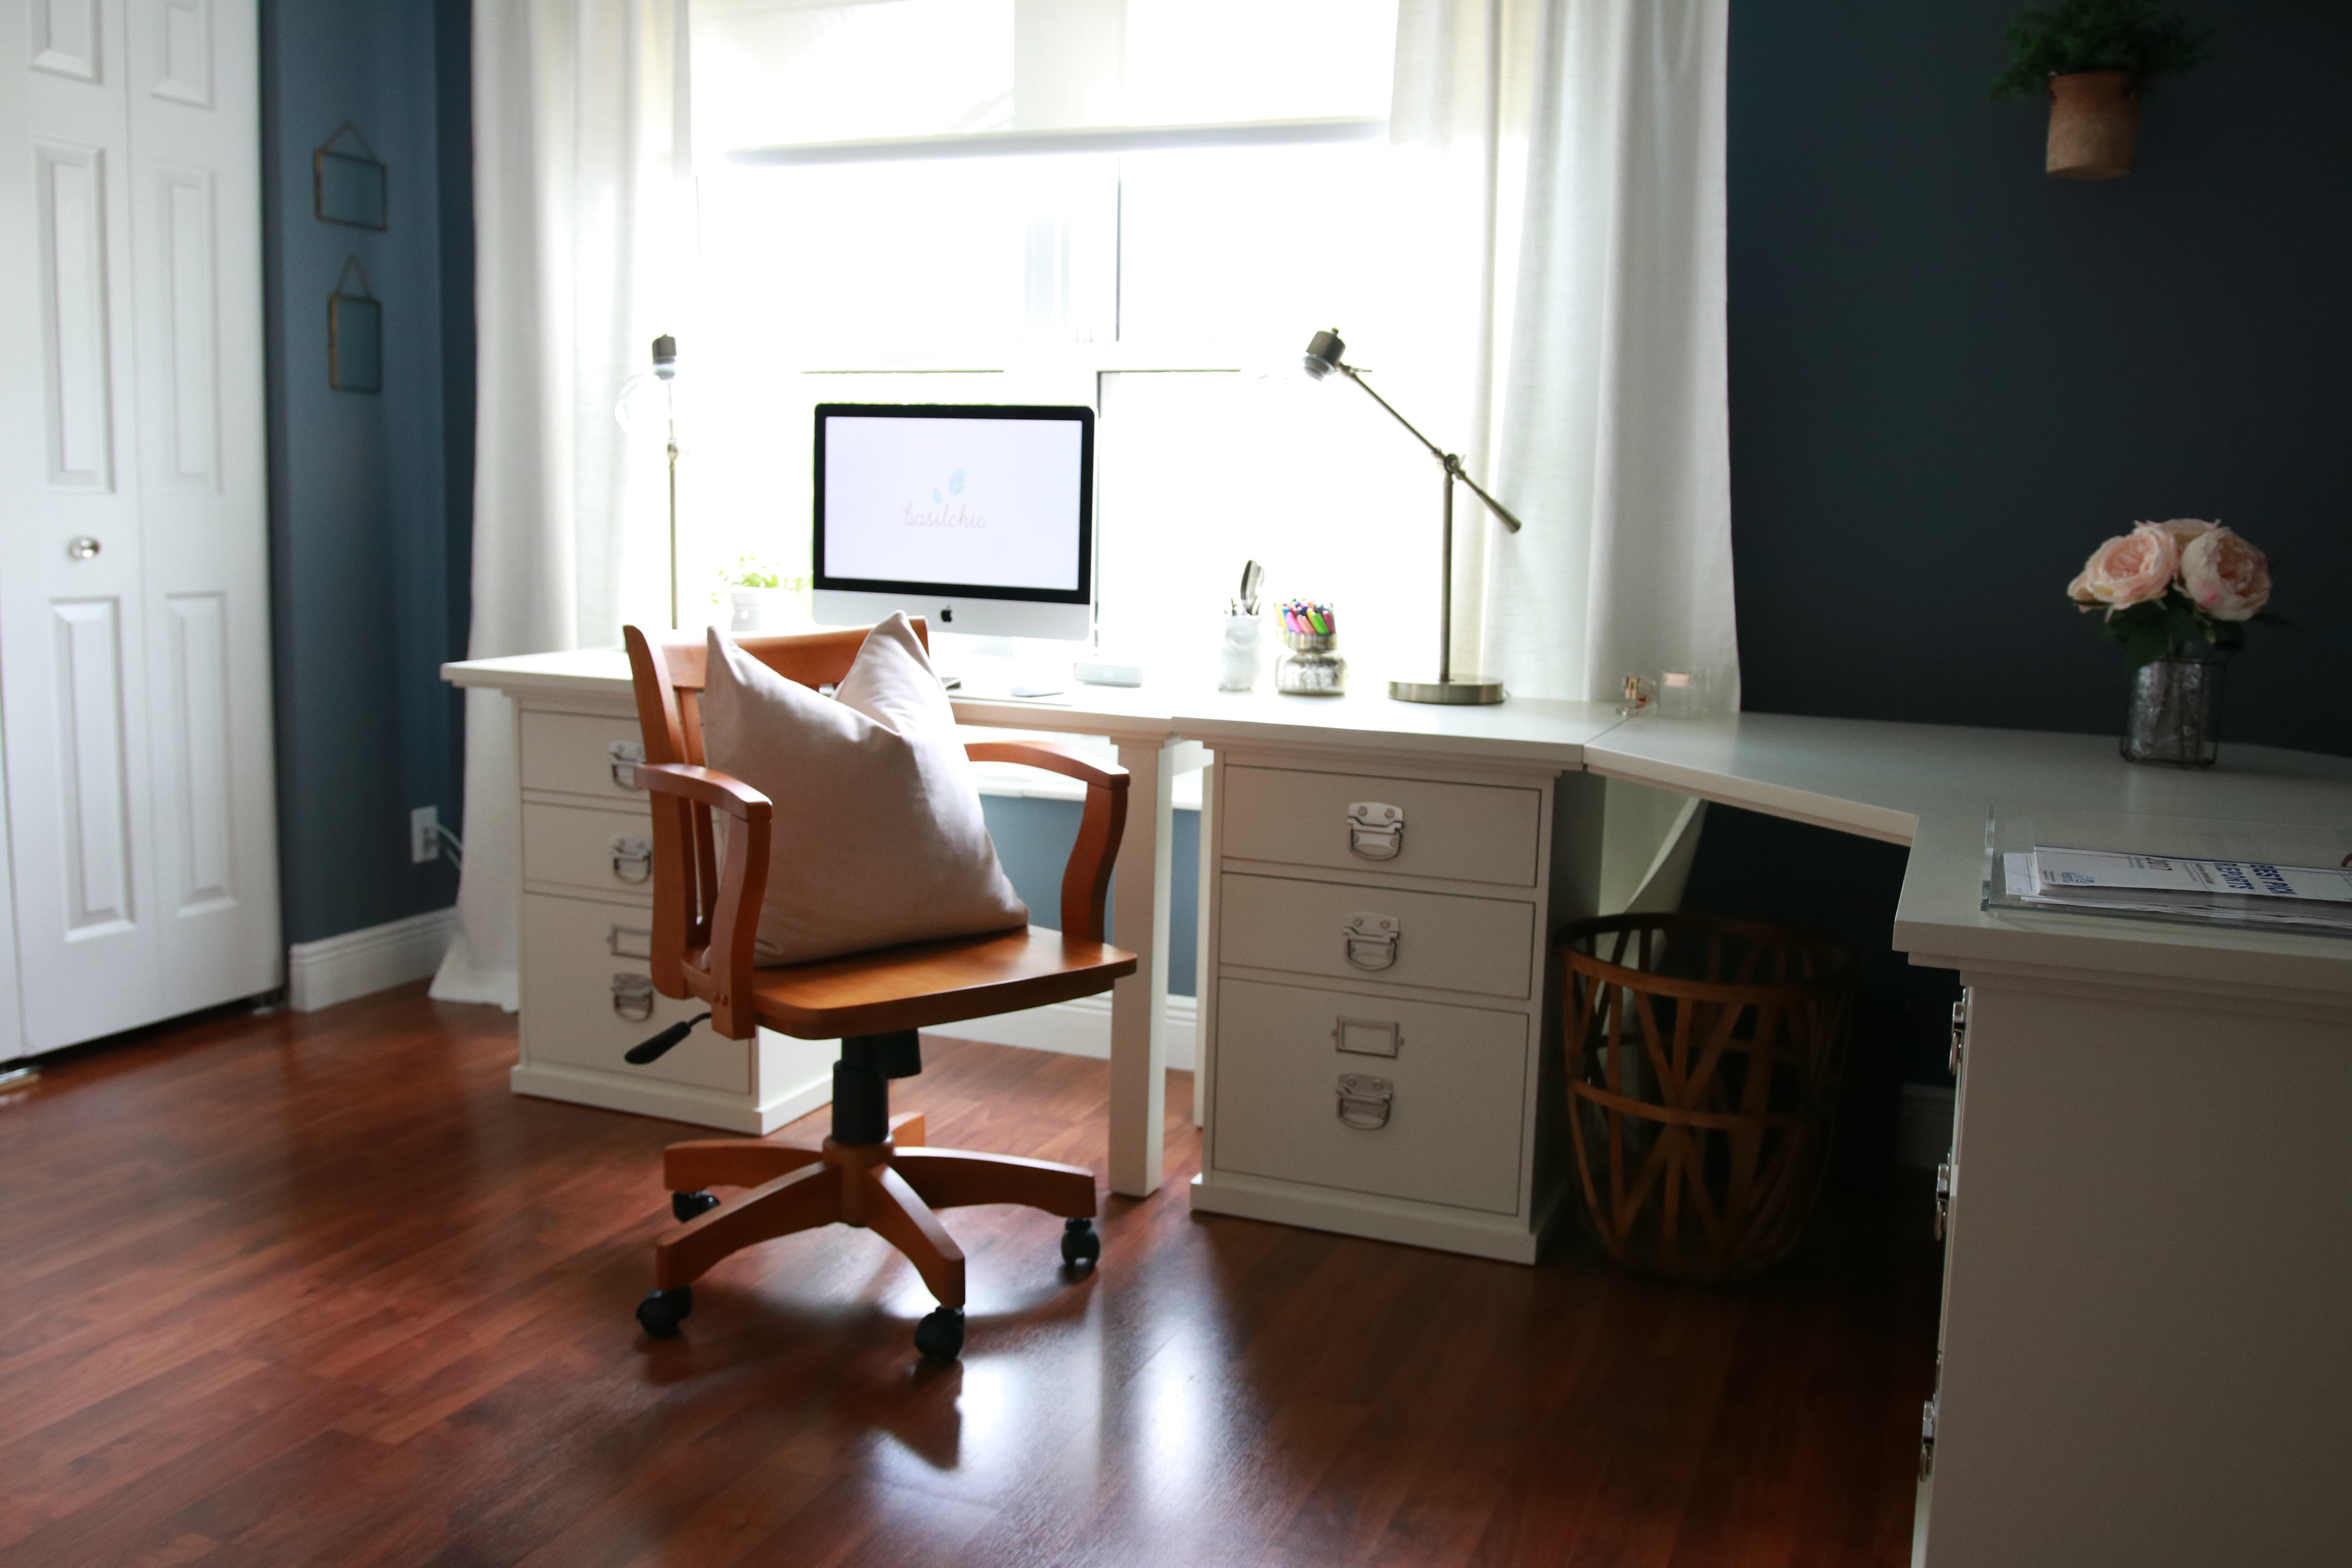 Home Office Design – Office Decor Ideas (Part 1 of 4 in Office Organization Series)